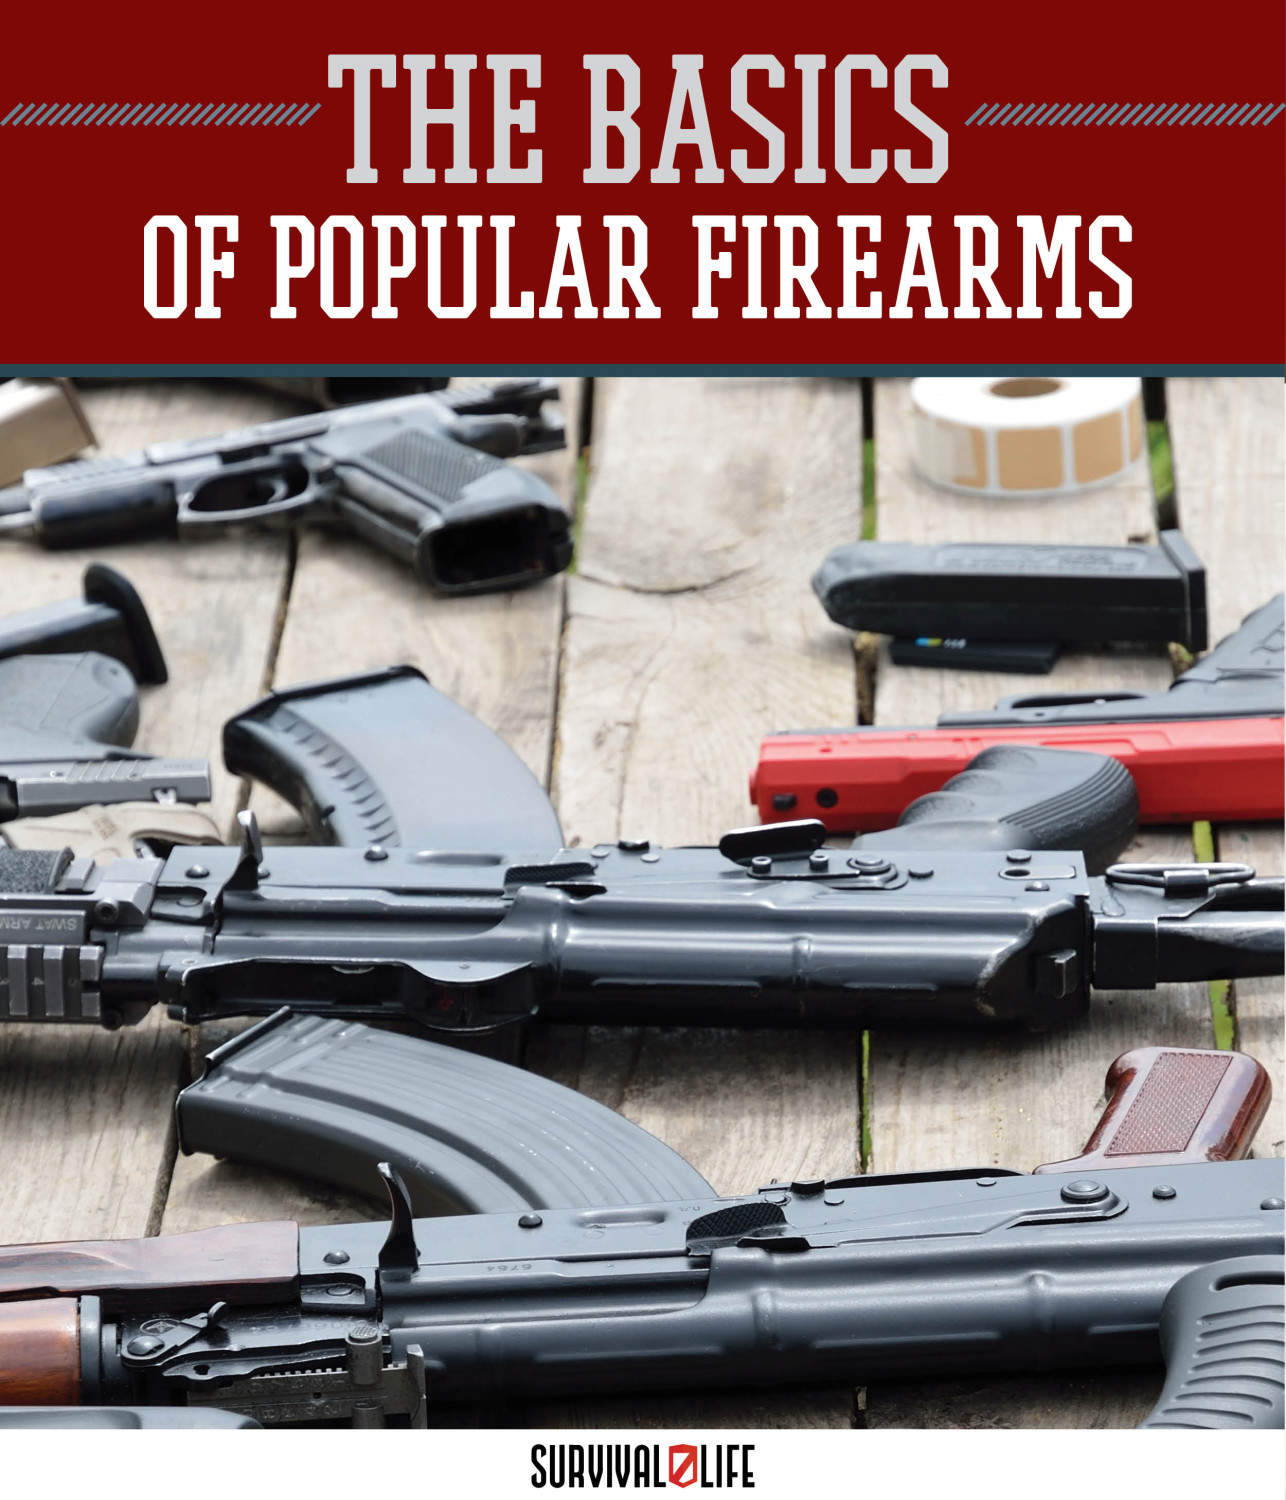 Intro to Firearms by Survival Life at http://survivallife.com/2015/04/27/intro-to-firearms/